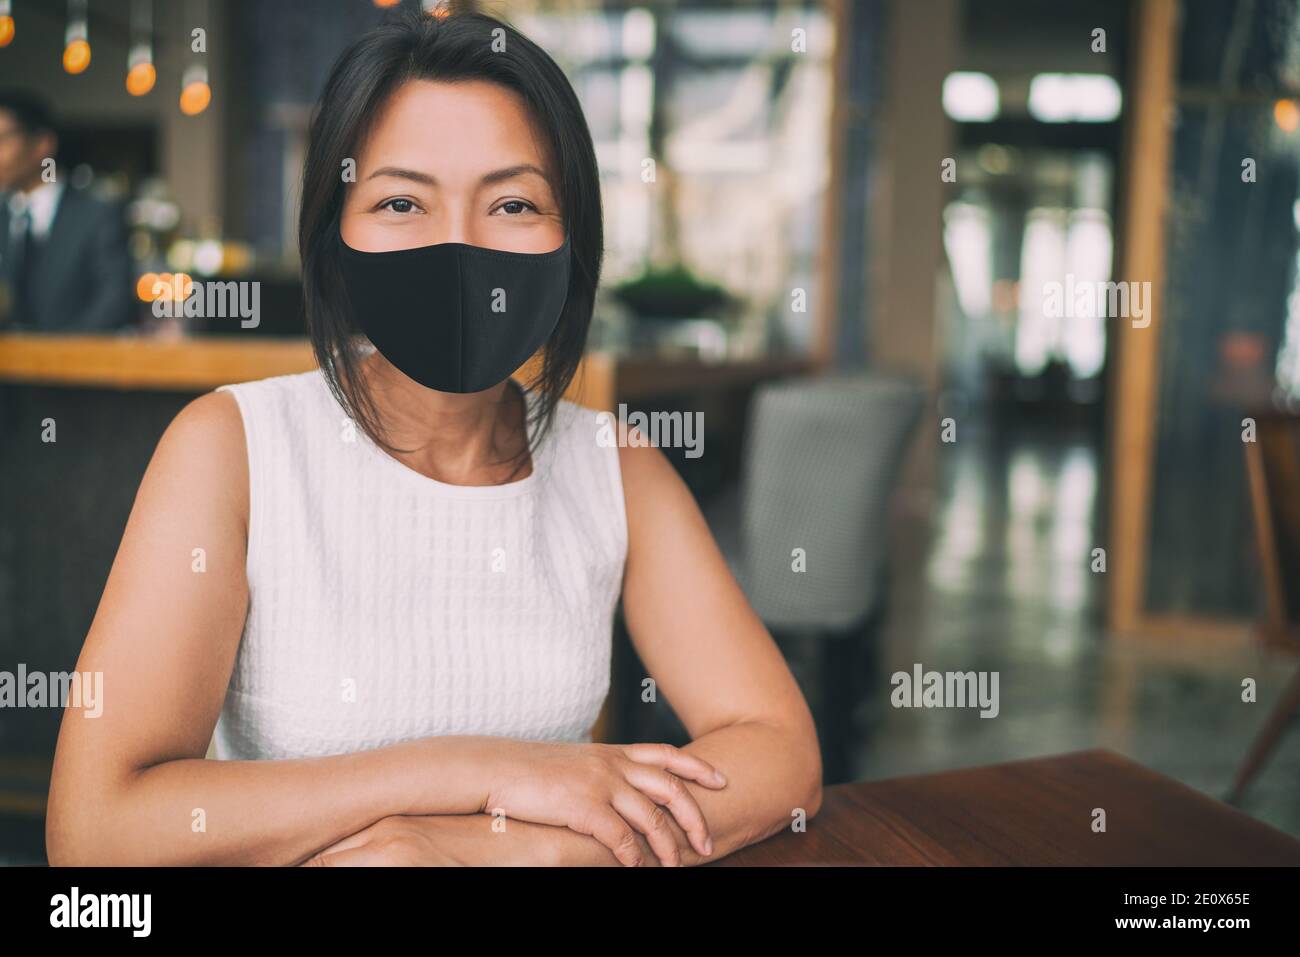 Asian mature business woman wearing protective face mask for coronavirus prevention in indoors public space as work office, restaurant, cafe Stock Photo